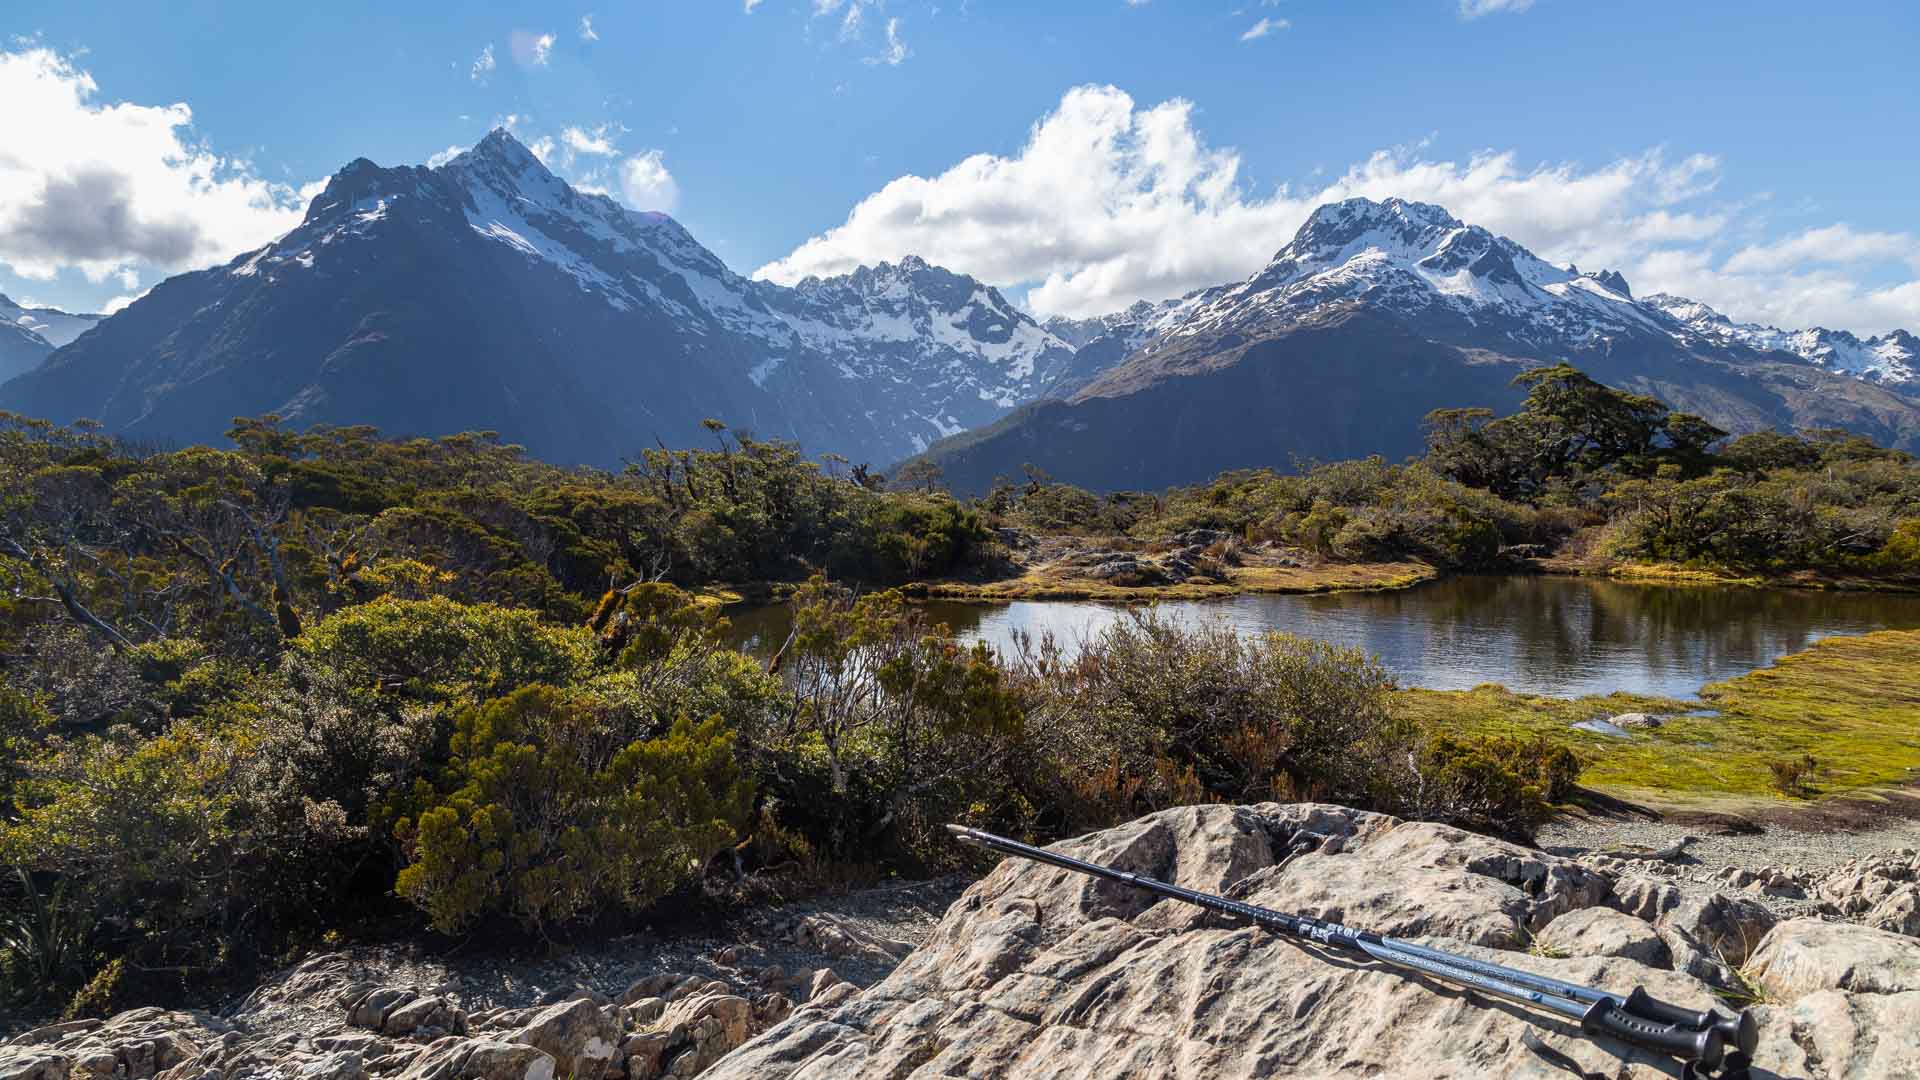 in the foreground, trekking poles on rocky ground, with scrub bushes and a small pond; in the distance, snow-capped mountains